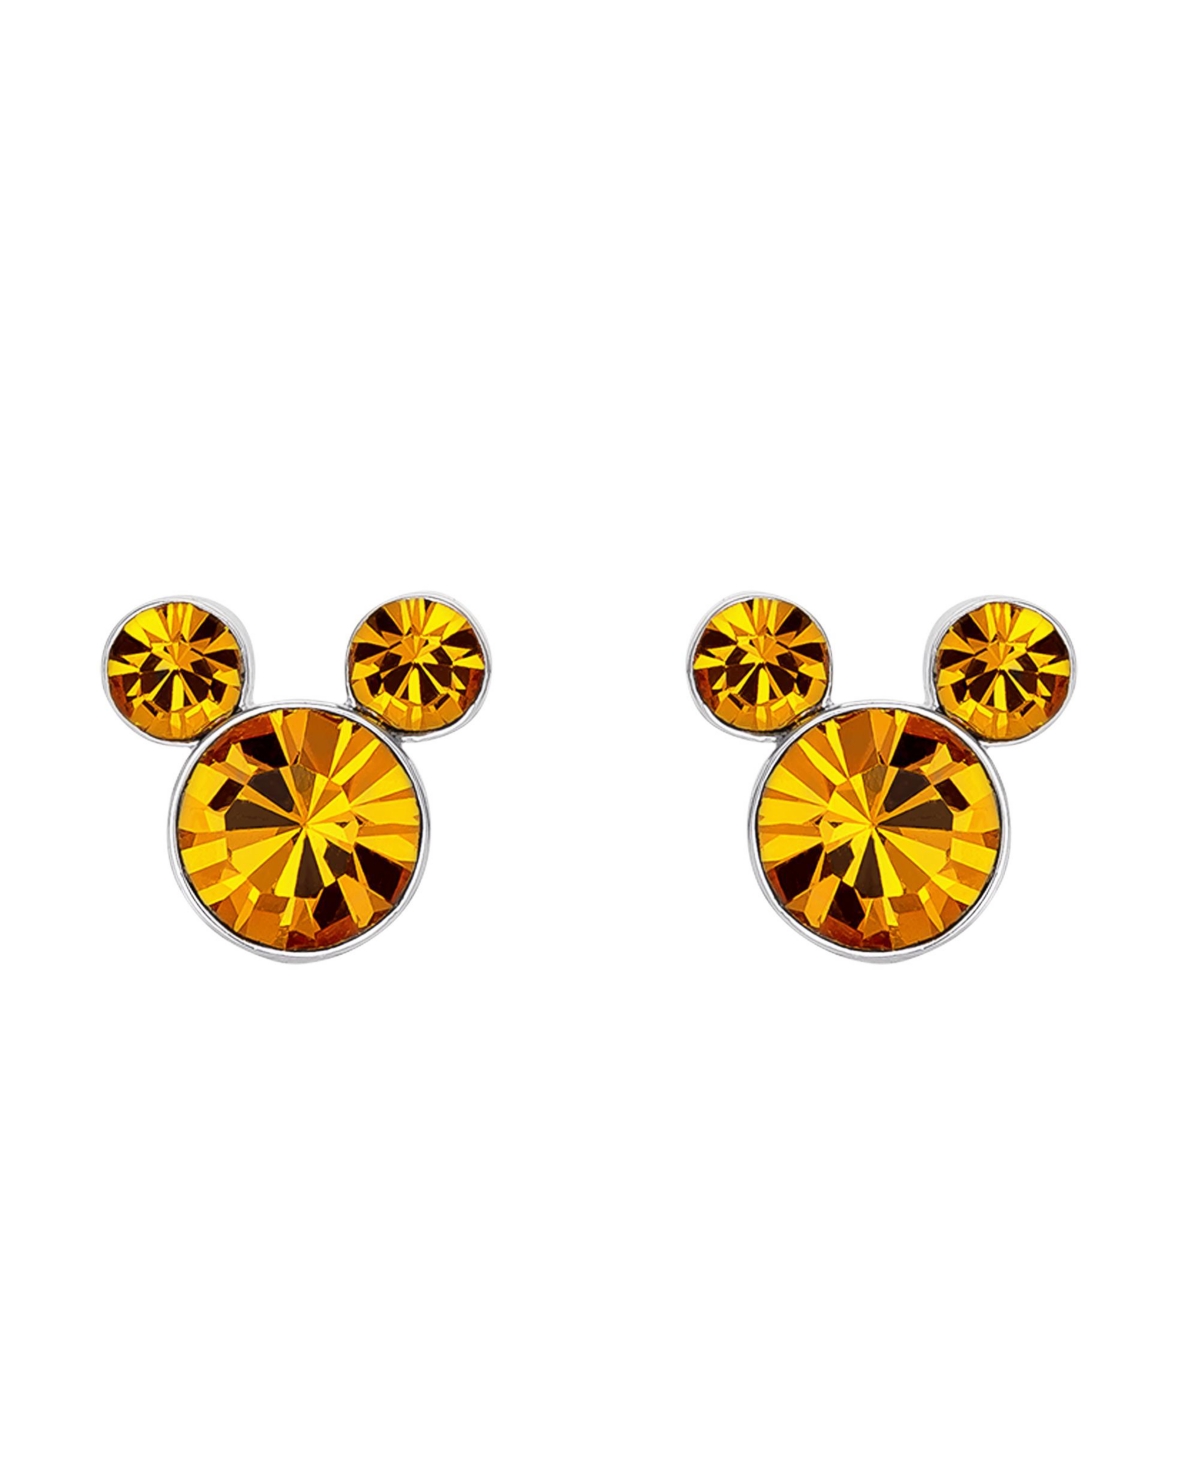 Mickey Mouse Silver Plated Birthstone Stud Earrings - November Topaz Brown Crystal - Silver tone, topaz